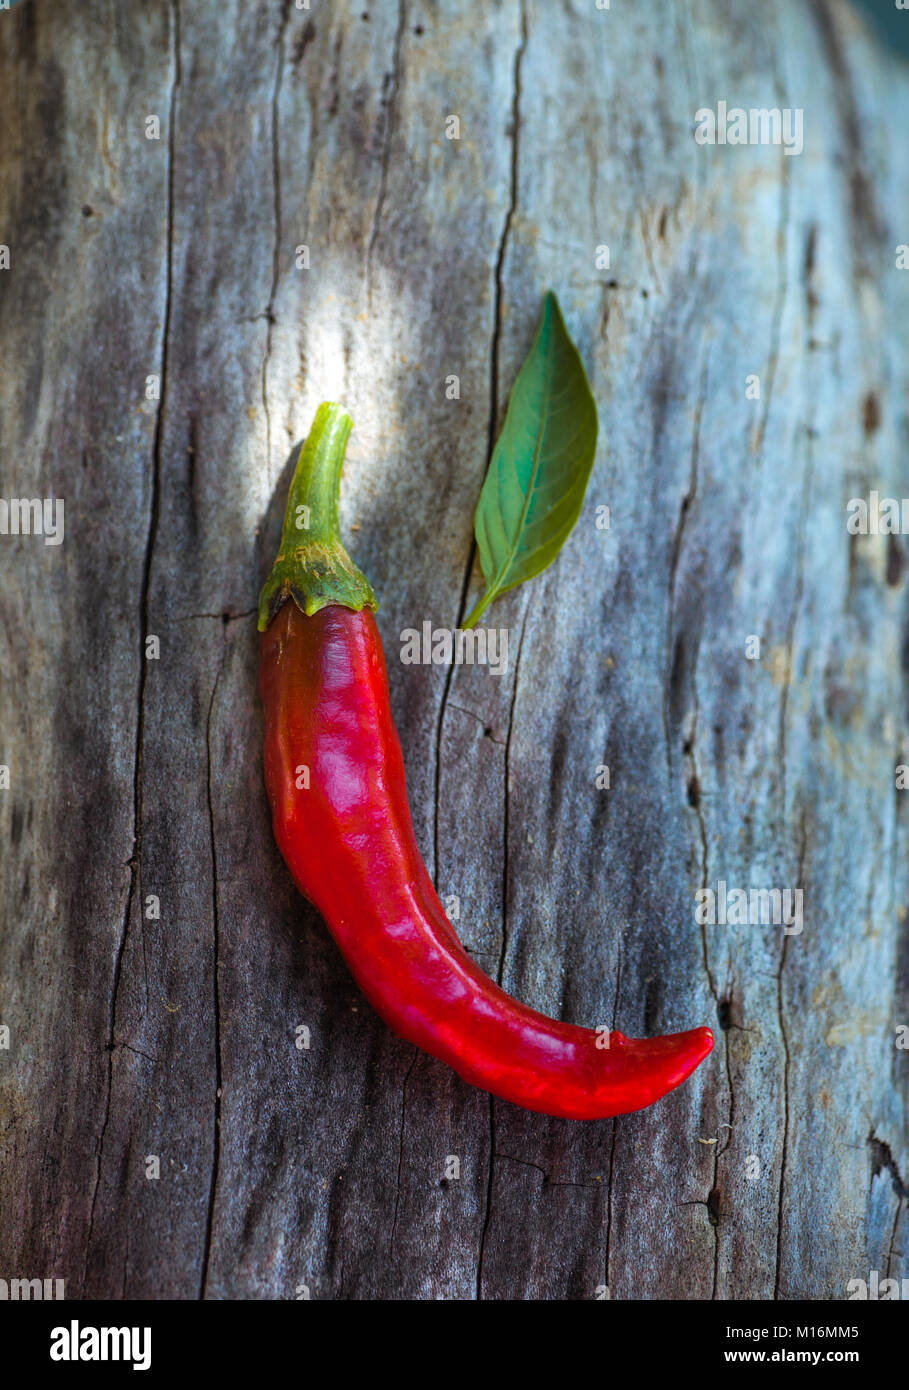 Food Ingredients. Frische Red Hot Chili Pepper Stockfoto